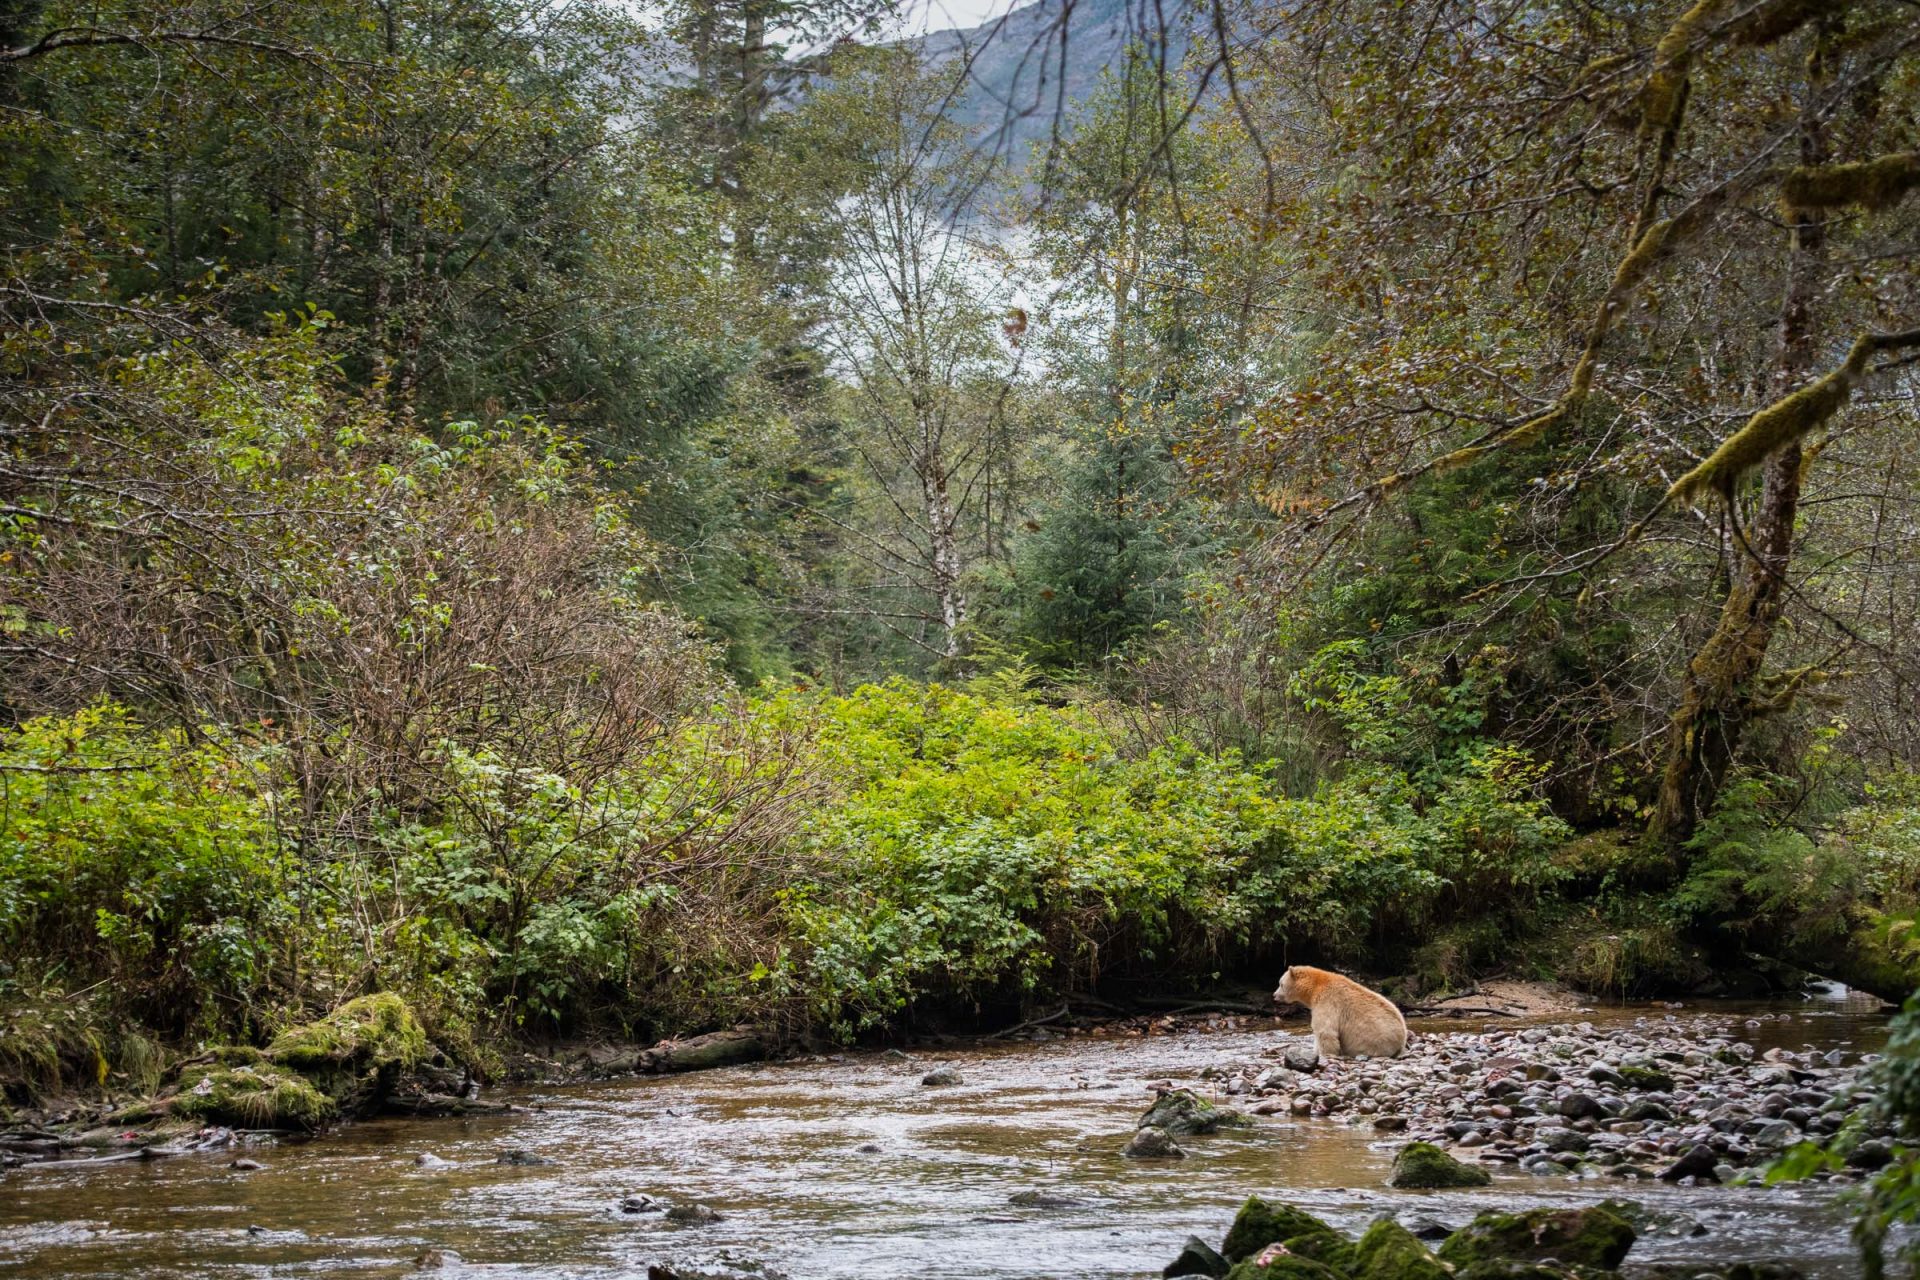 A male spirit, or kermode bear (Ursus americanus kermodei), known as "Boss," watches for fish in a salmon spawning river. Great Bear Rainforest, British Columbia, Canada.